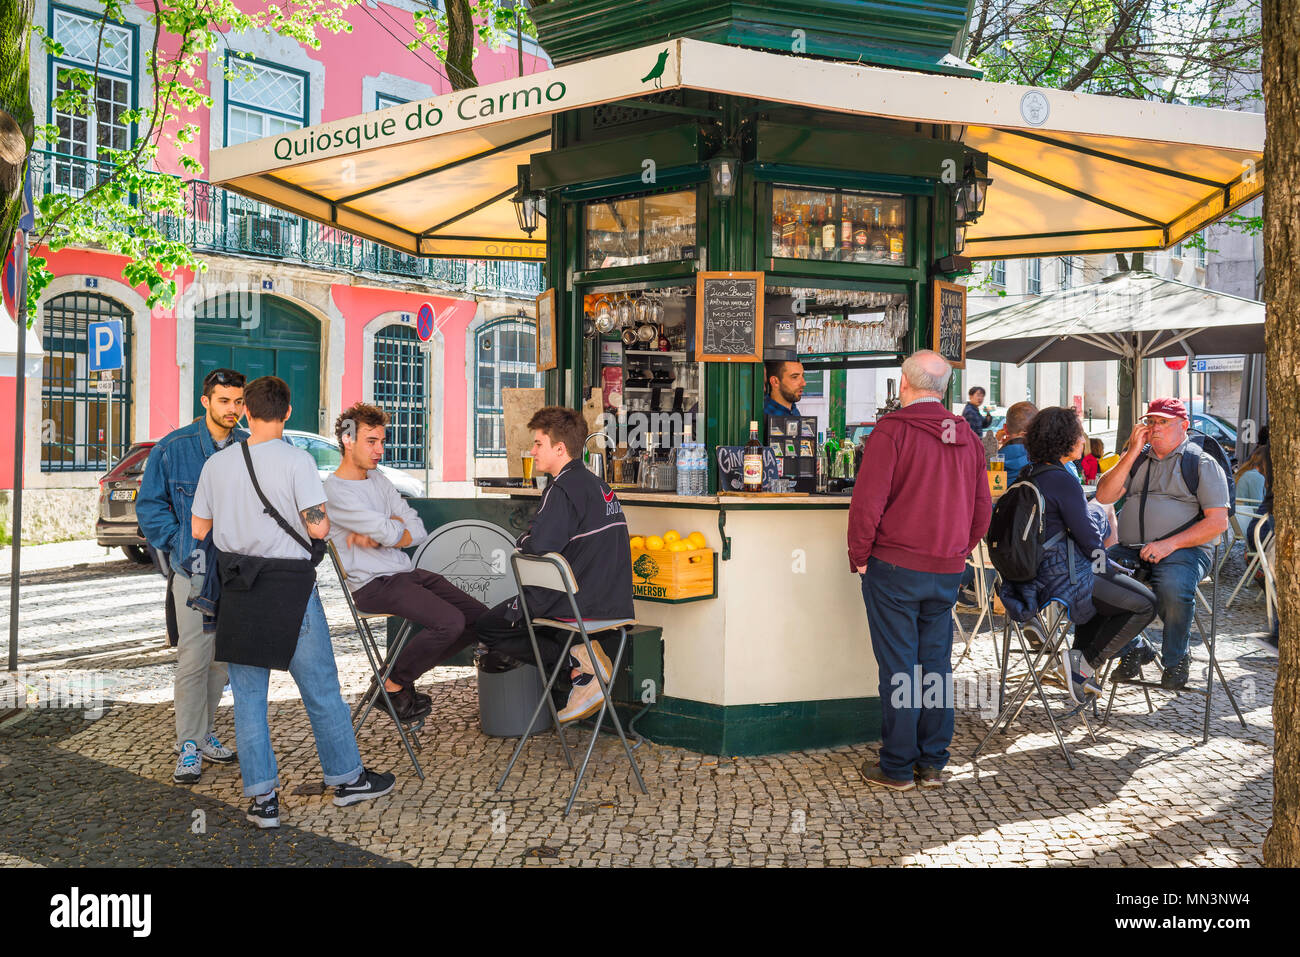 Lisbon square, view in spring of people relaxing at a popular kiosk in a corner of the Largo do Carmo in the Bairro Alto quarter of Lisbon, Portugal. Stock Photo